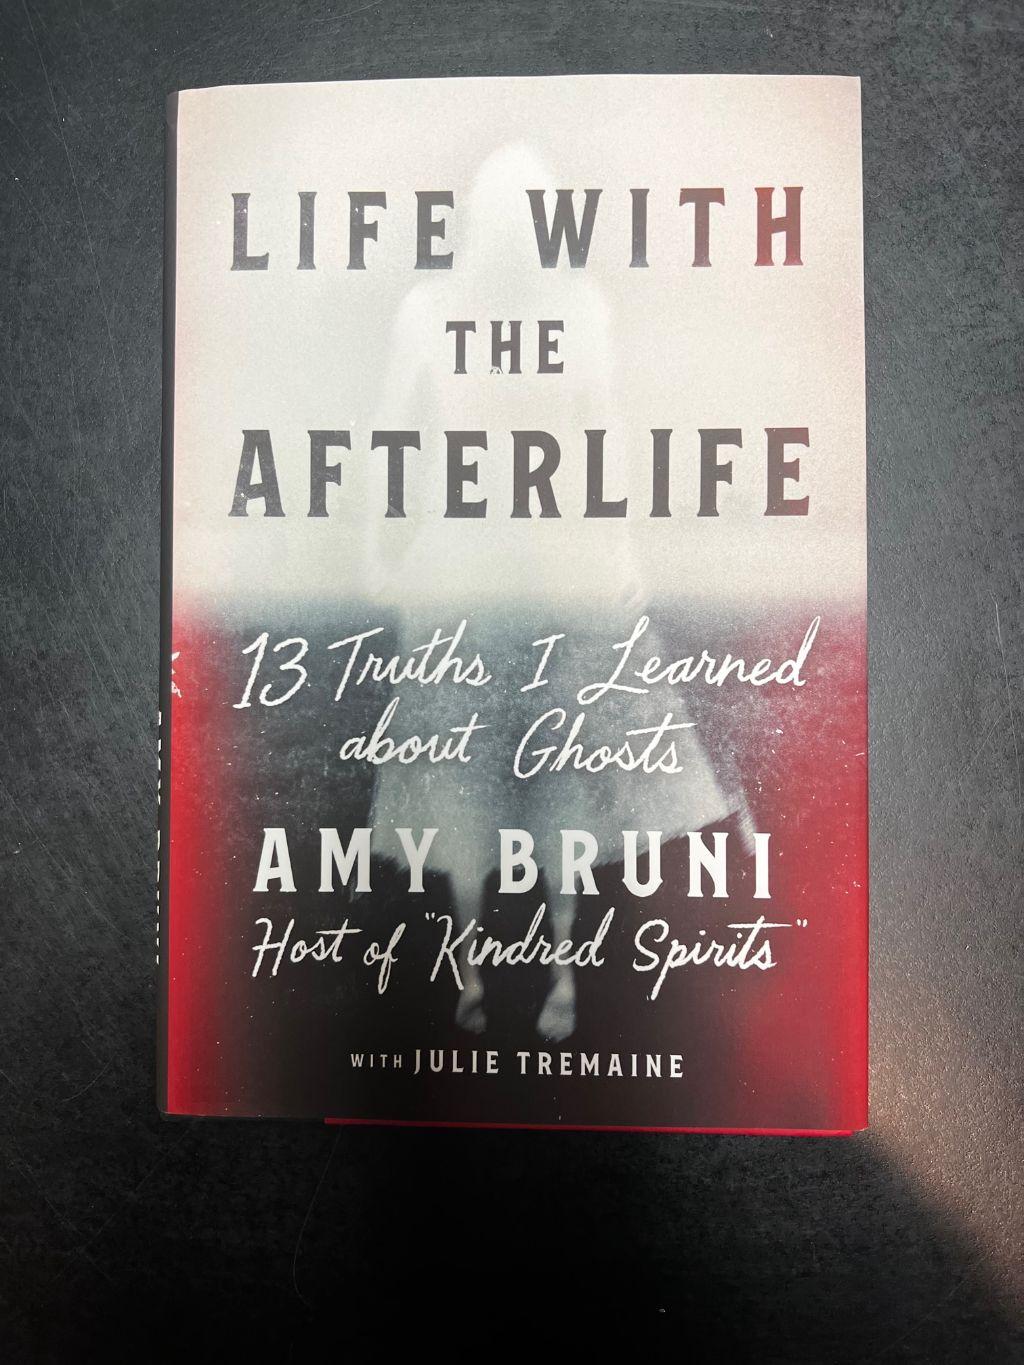 Life with the Afterlife by Amy Bruni